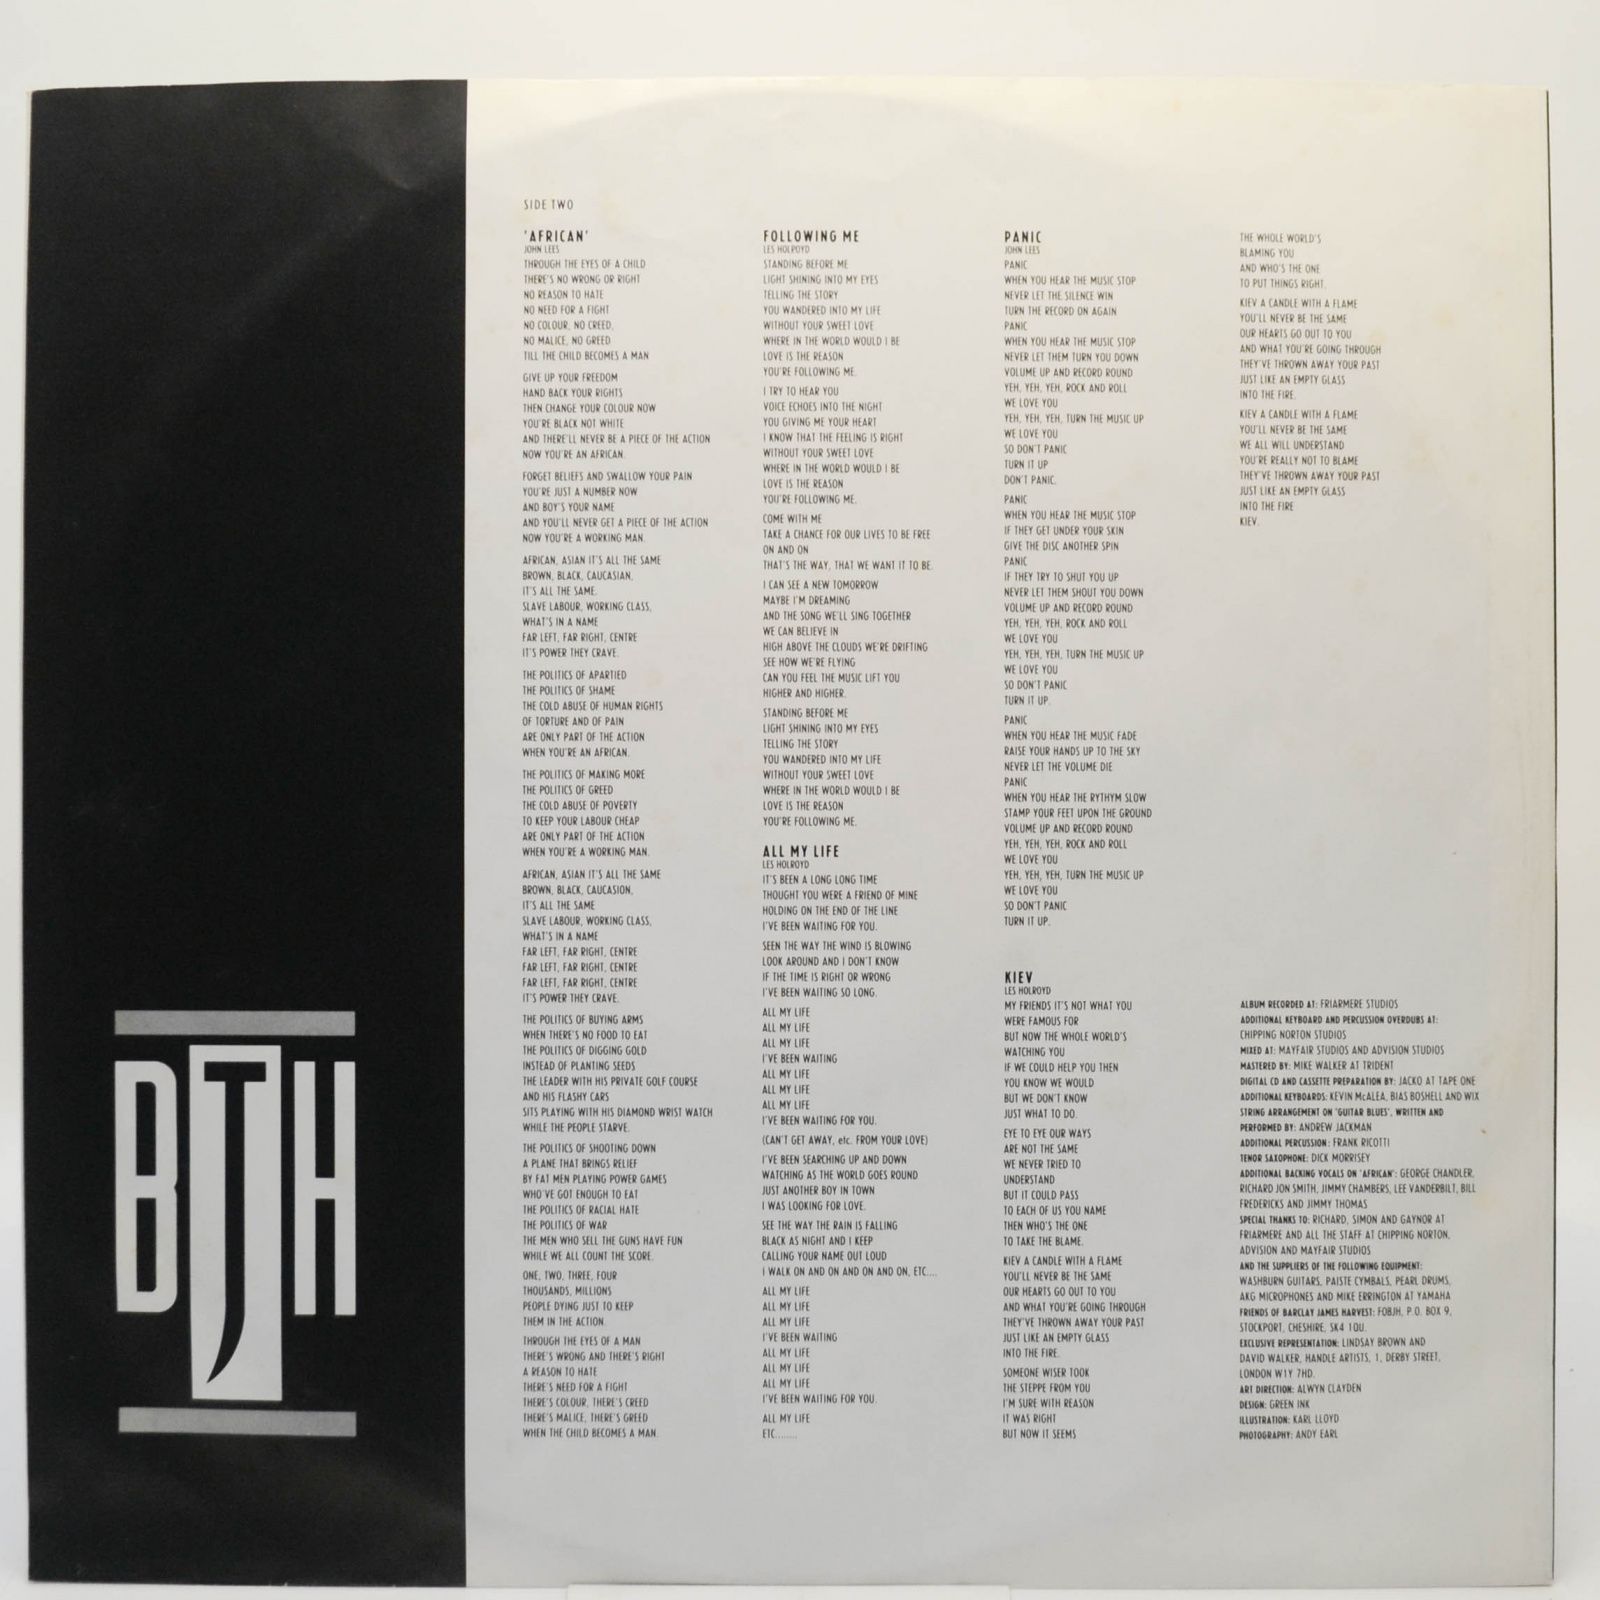 Barclay James Harvest — Face To Face, 1987